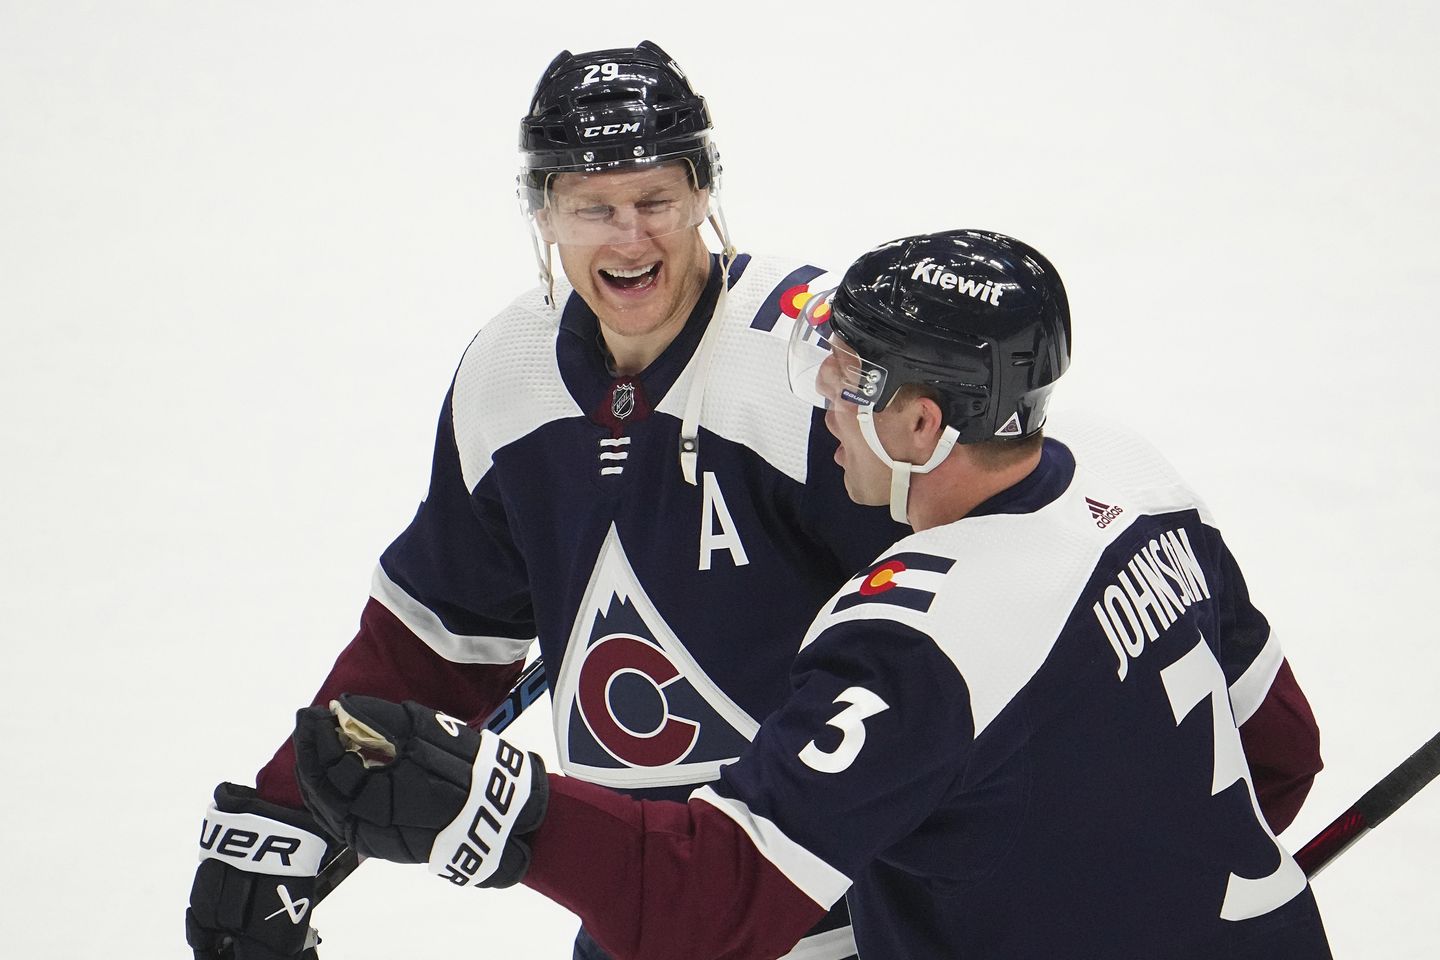 Nathan MacKinnon races to career season, looks to power Colorado Avalanche on another title run
